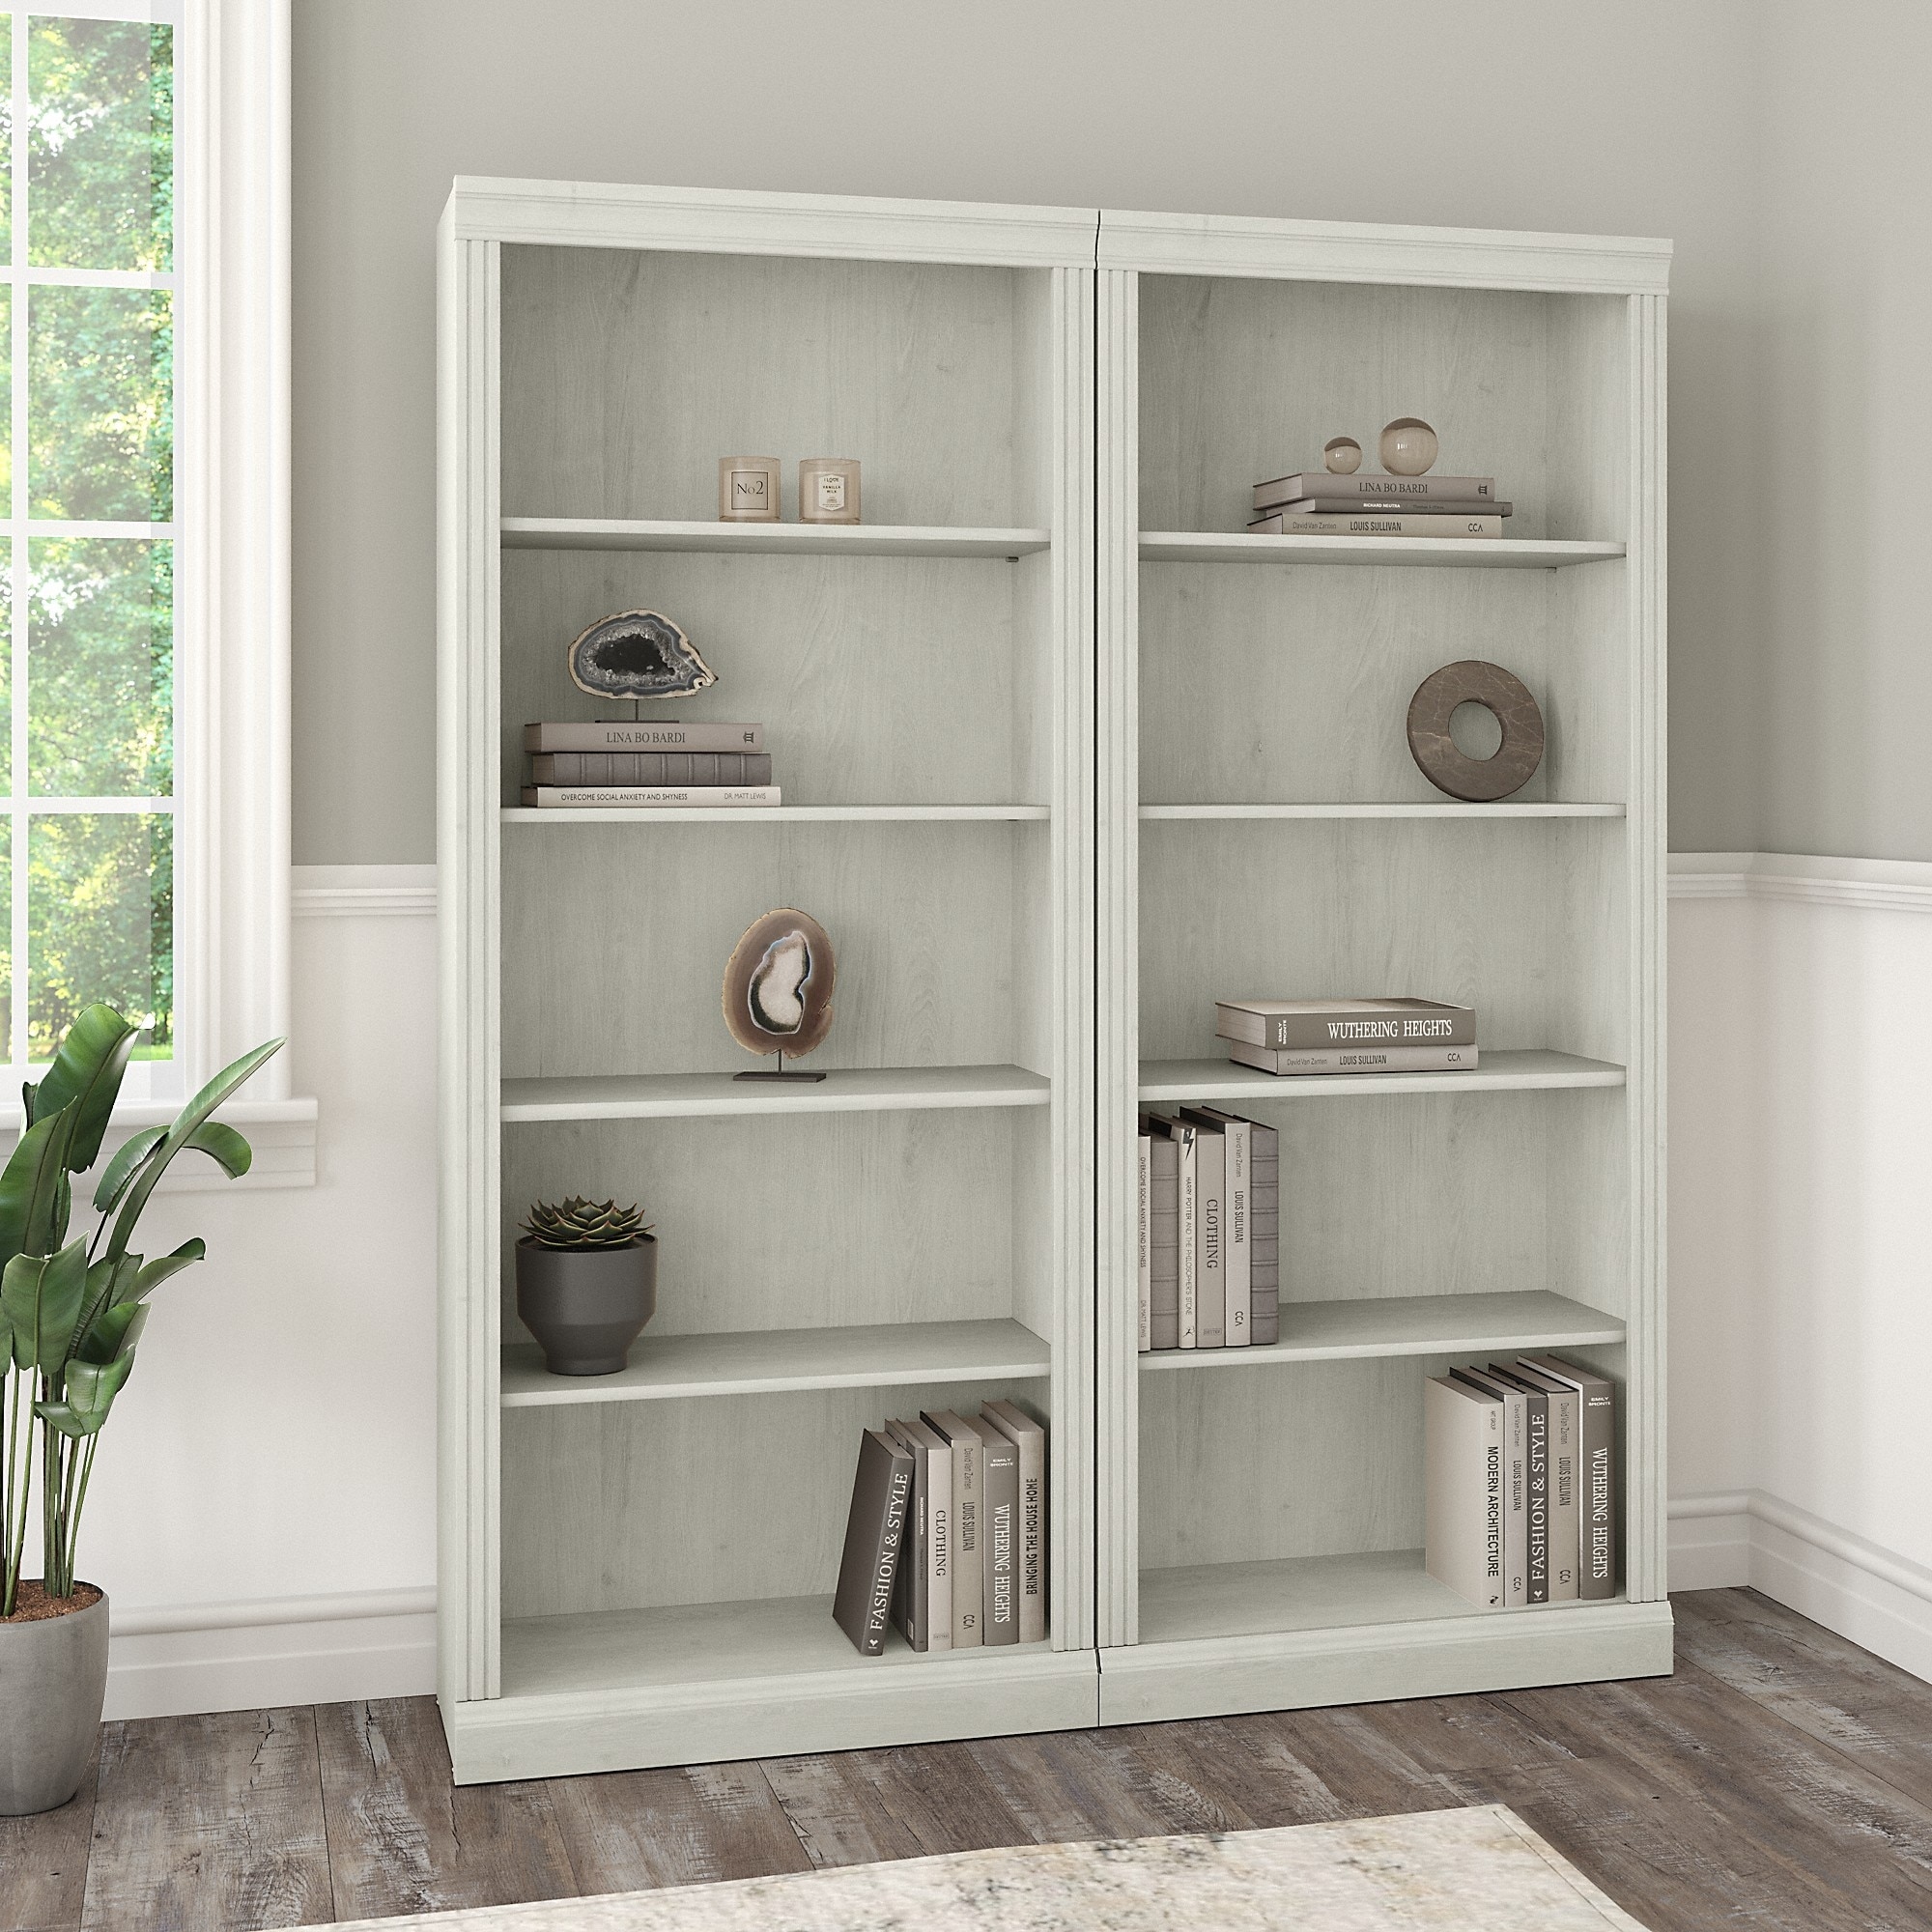 https://ak1.ostkcdn.com/images/products/is/images/direct/f2e82999f3b3d4aace013cefe6a7b3d7bb308b71/Saratoga-Tall-5-Shelf-Bookcase---Set-of-2-by-Bush-Furniture.jpg